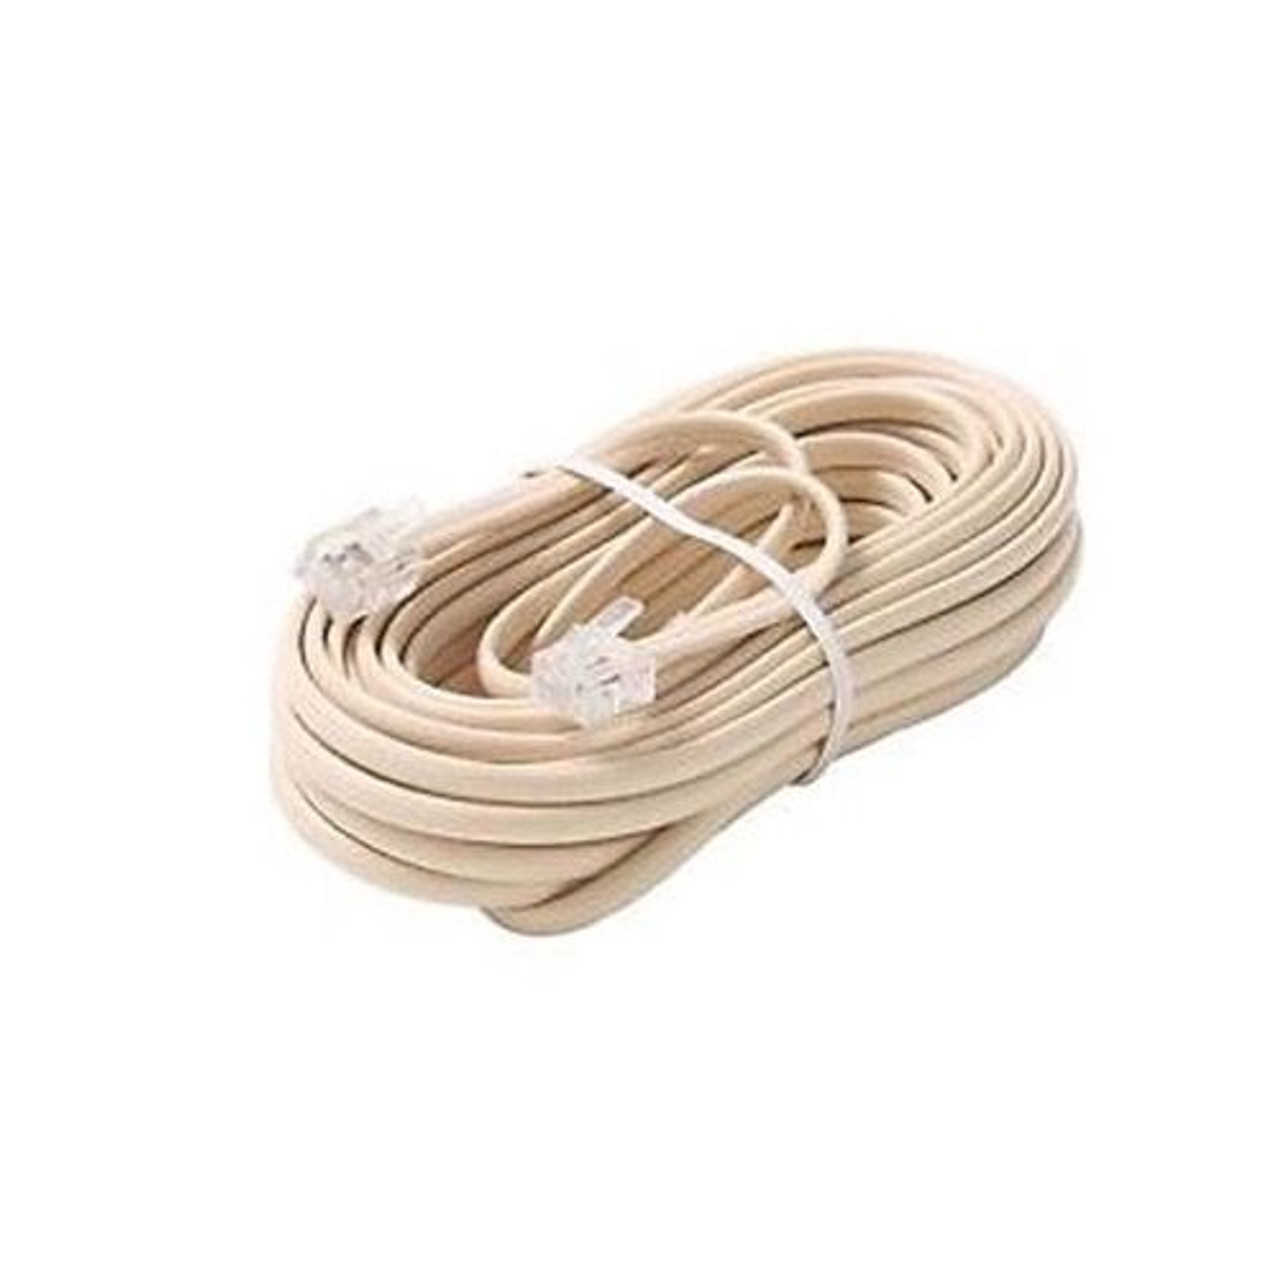 Eagle 100' Telephone Line Cord Flat with RJ11 Plug Connection Each End Ivory 4-Conductor Modular End Phone Voice Ultra Flexible Flat Telephone Cord Extension RJ-11 6P4C Snap-In Connector Jacks